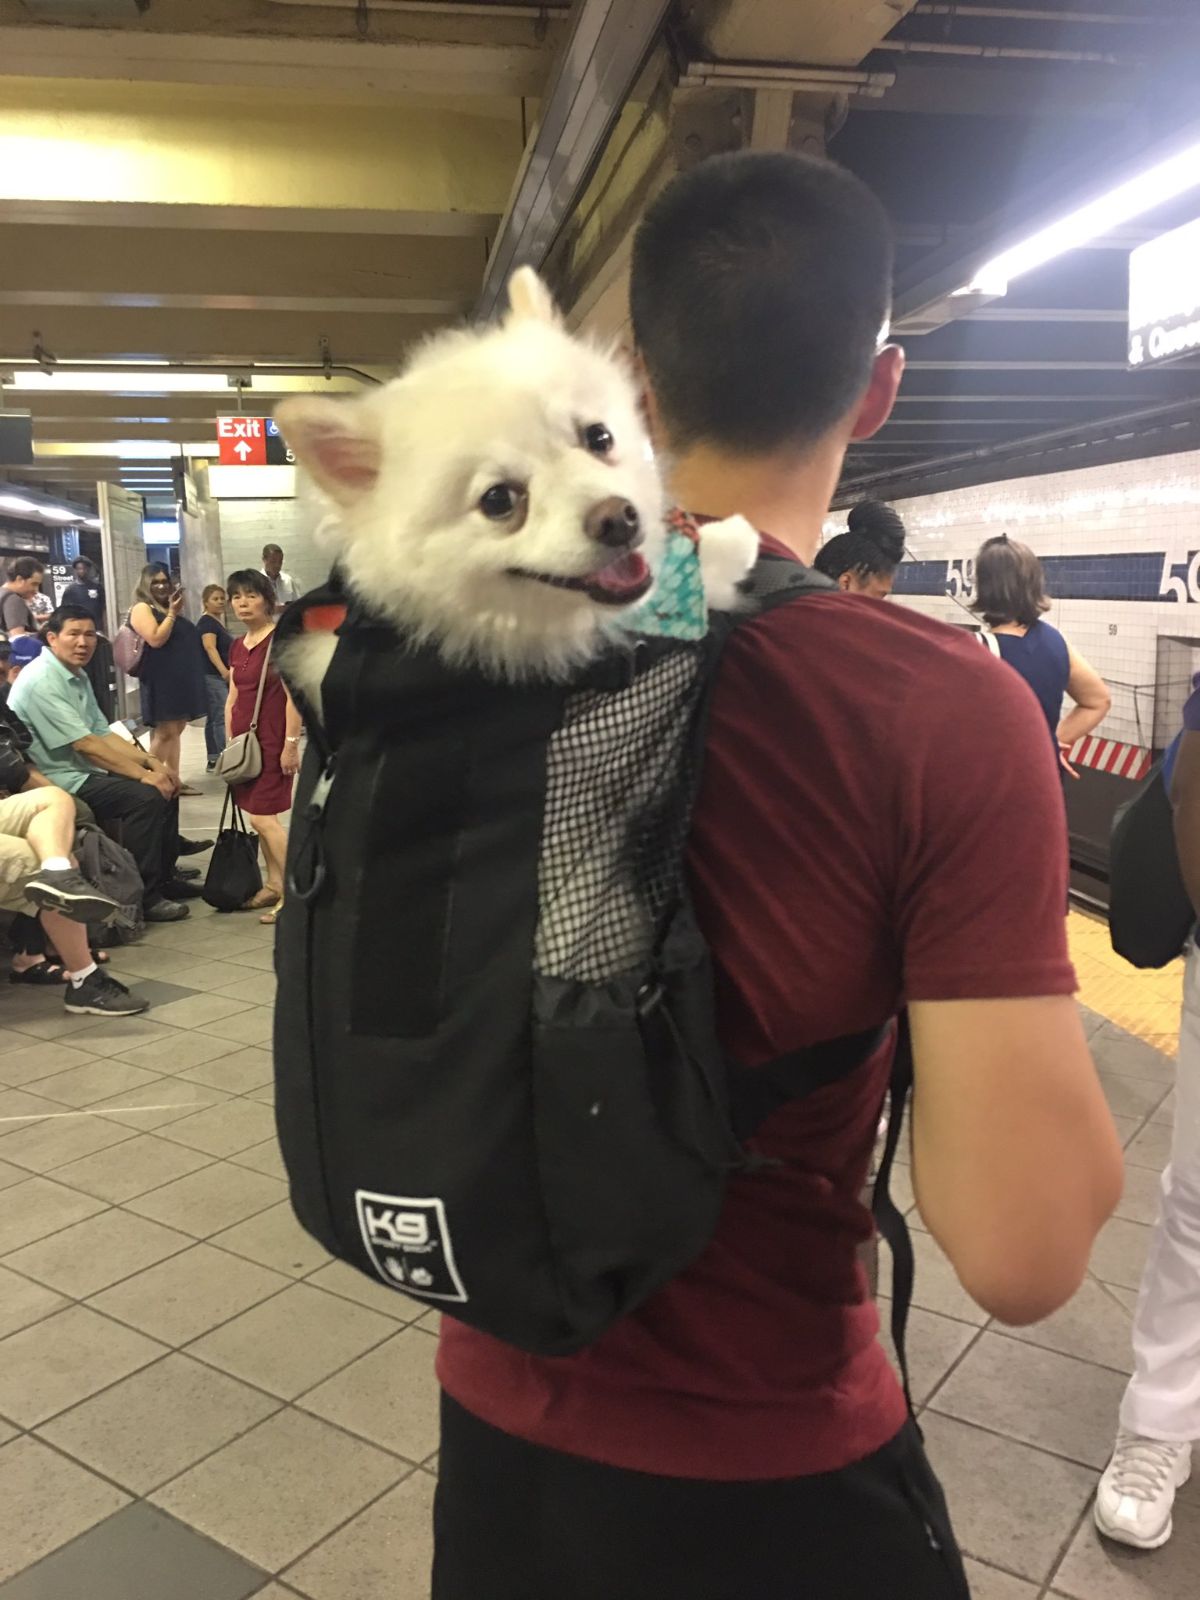 fluffy white dog inside a black backpack being worn by a guy